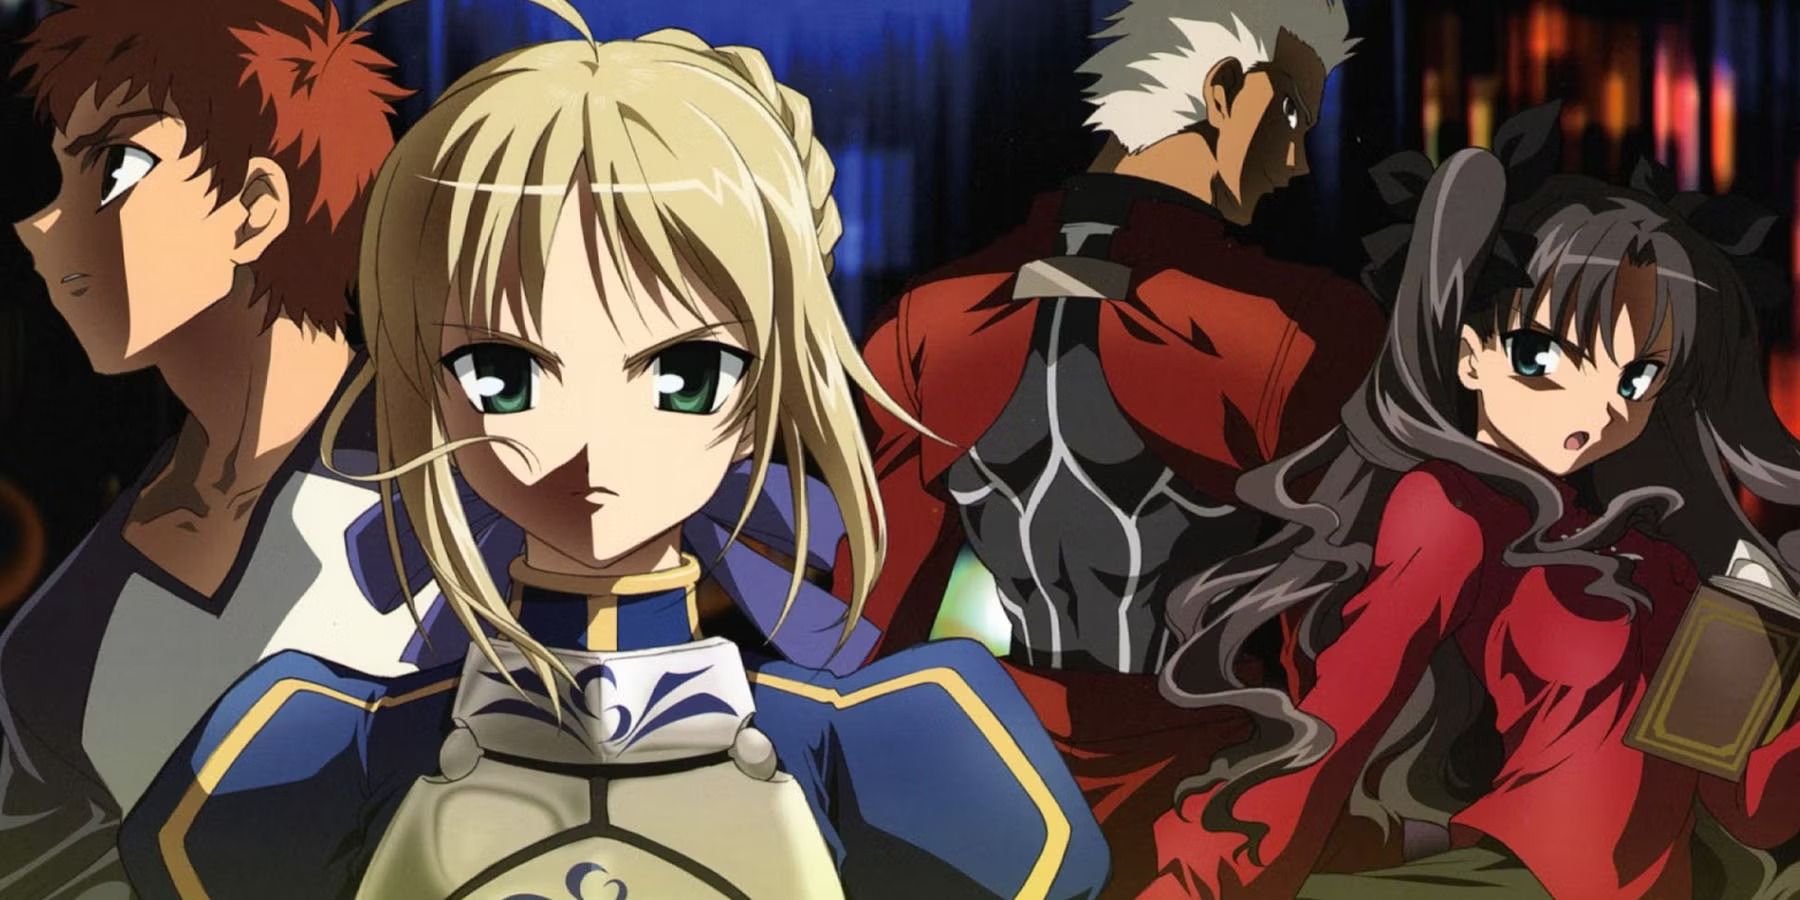 The cast of Fate/stay night.